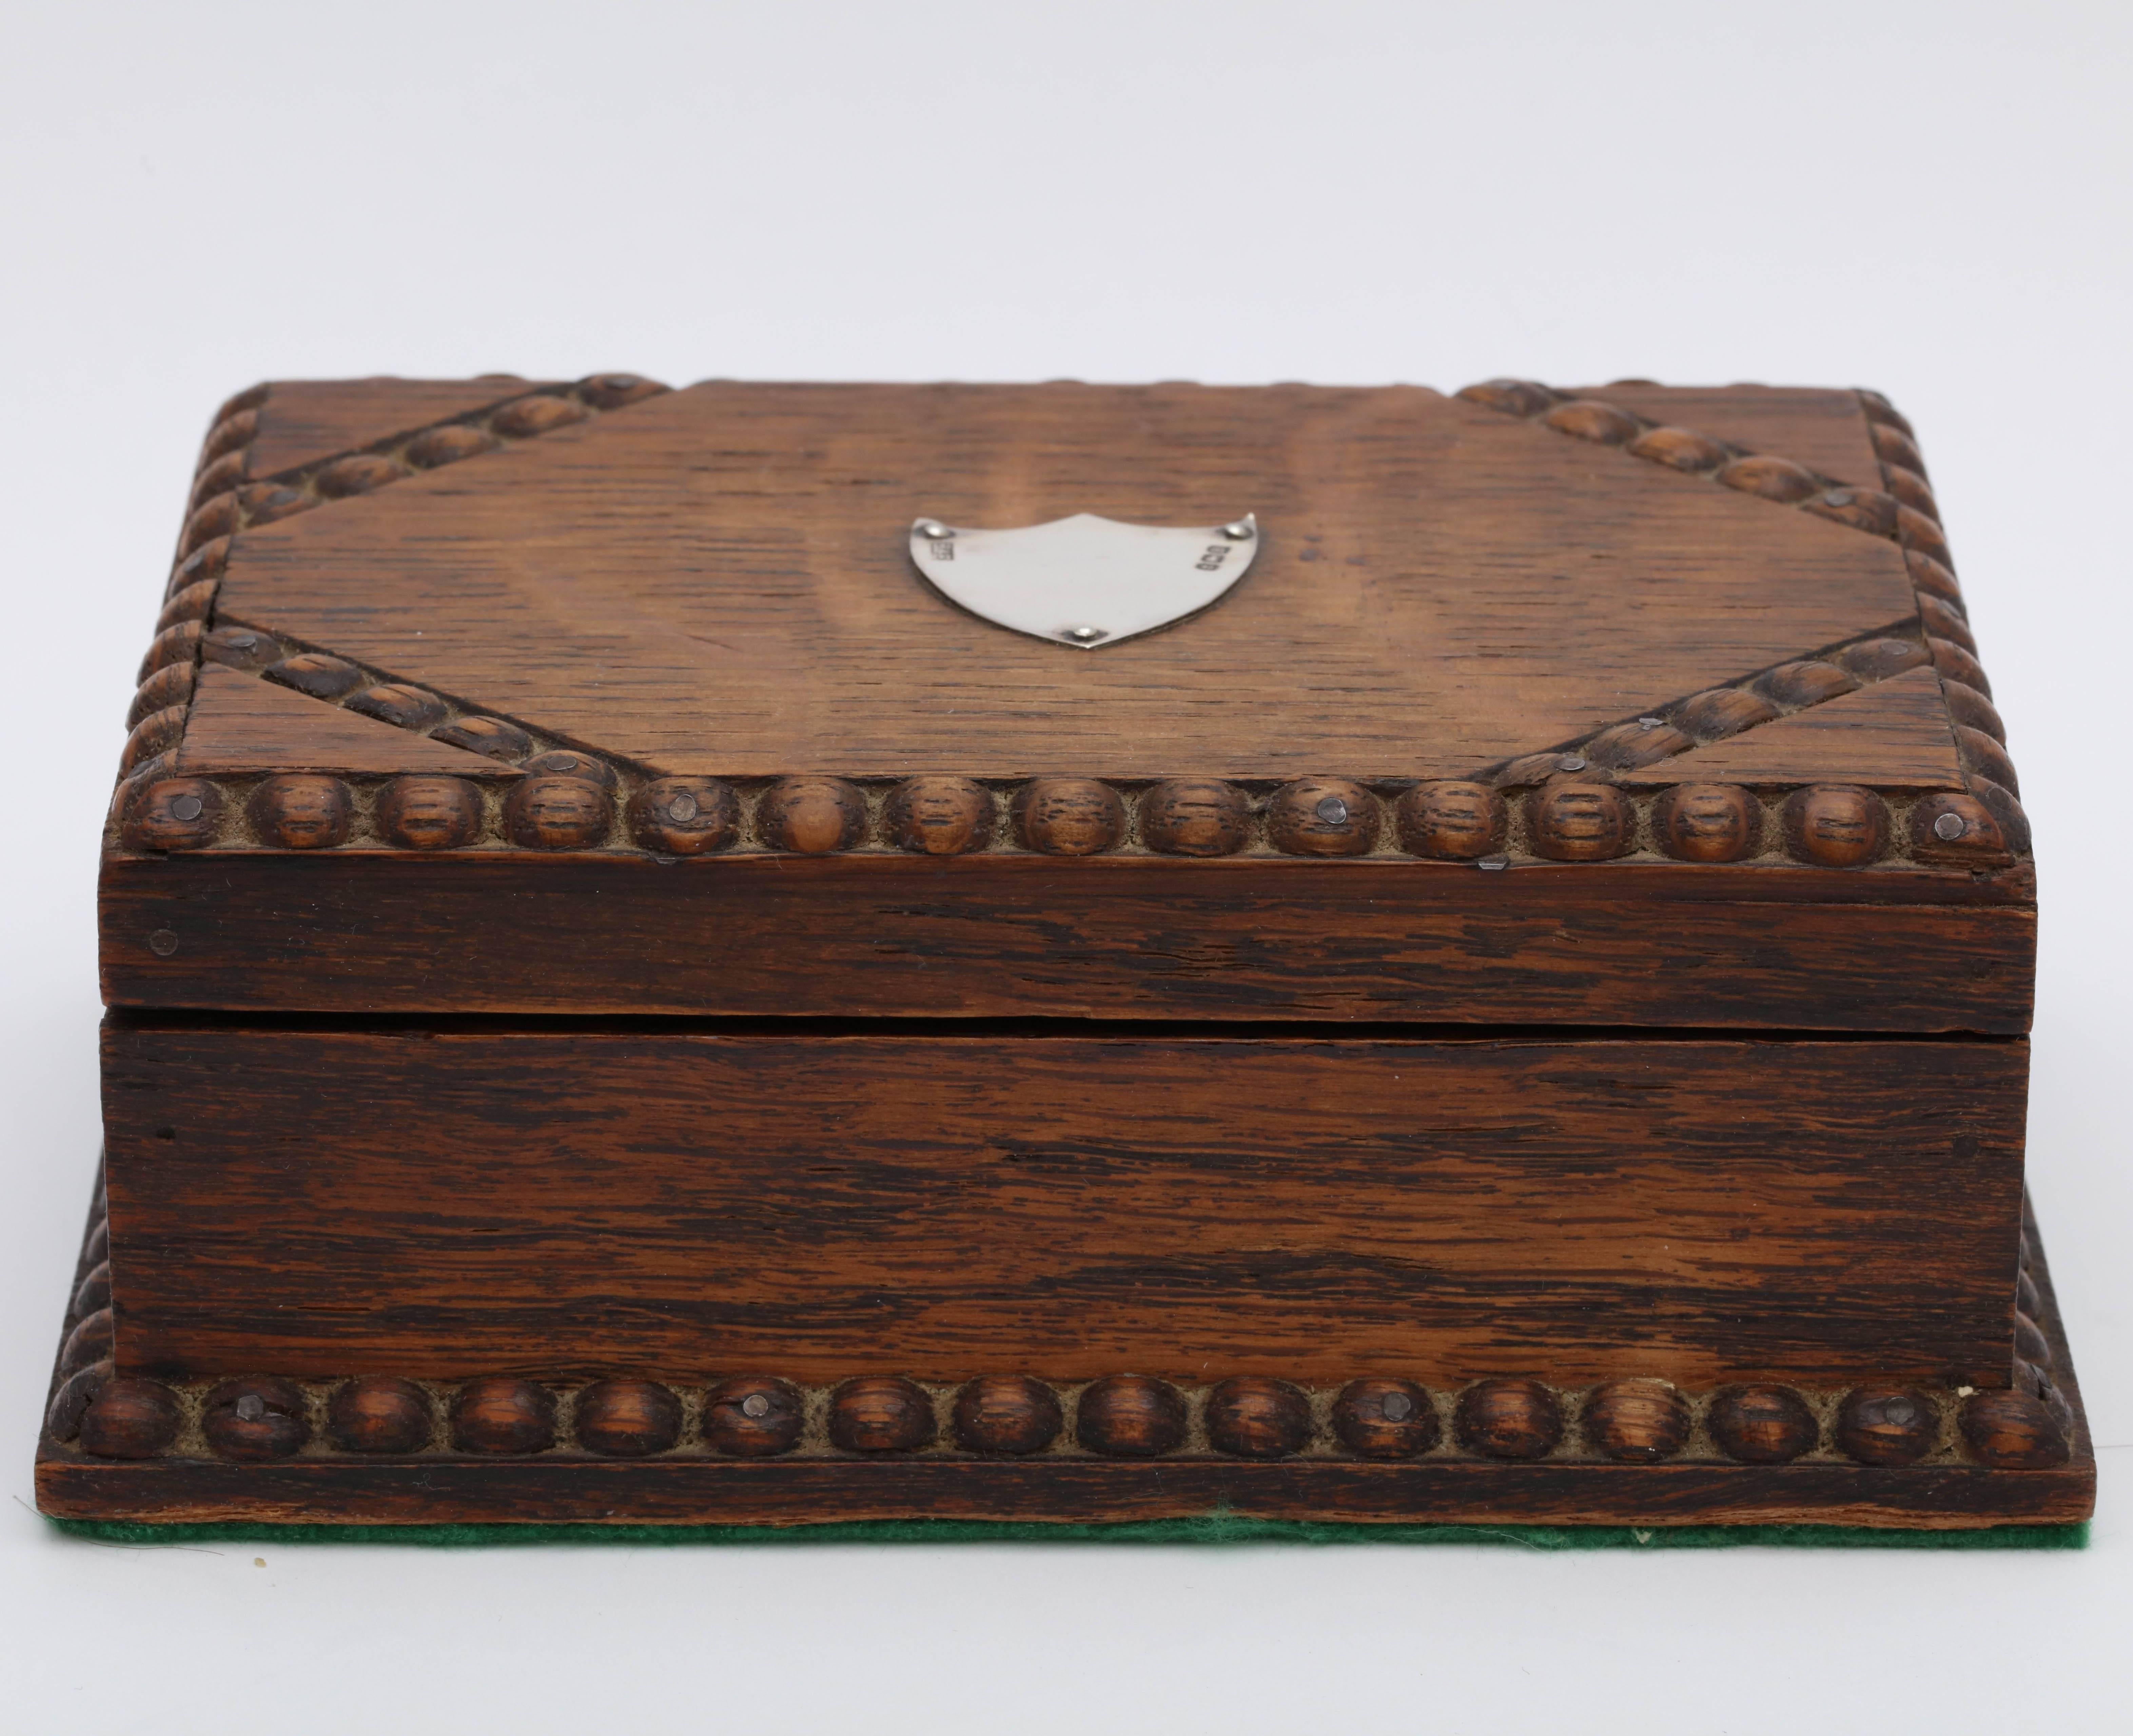 Arts & Crafts, sterling silver - mounted oak table box with hinged lid, Birmingham, England, 1926, William Sydney Hall and Edward Thurston Davies (trading as Hall and Fitzgerald) - makers. Measures 5 1/2 inches wide x 4 inches deep x 2 1/4 inches